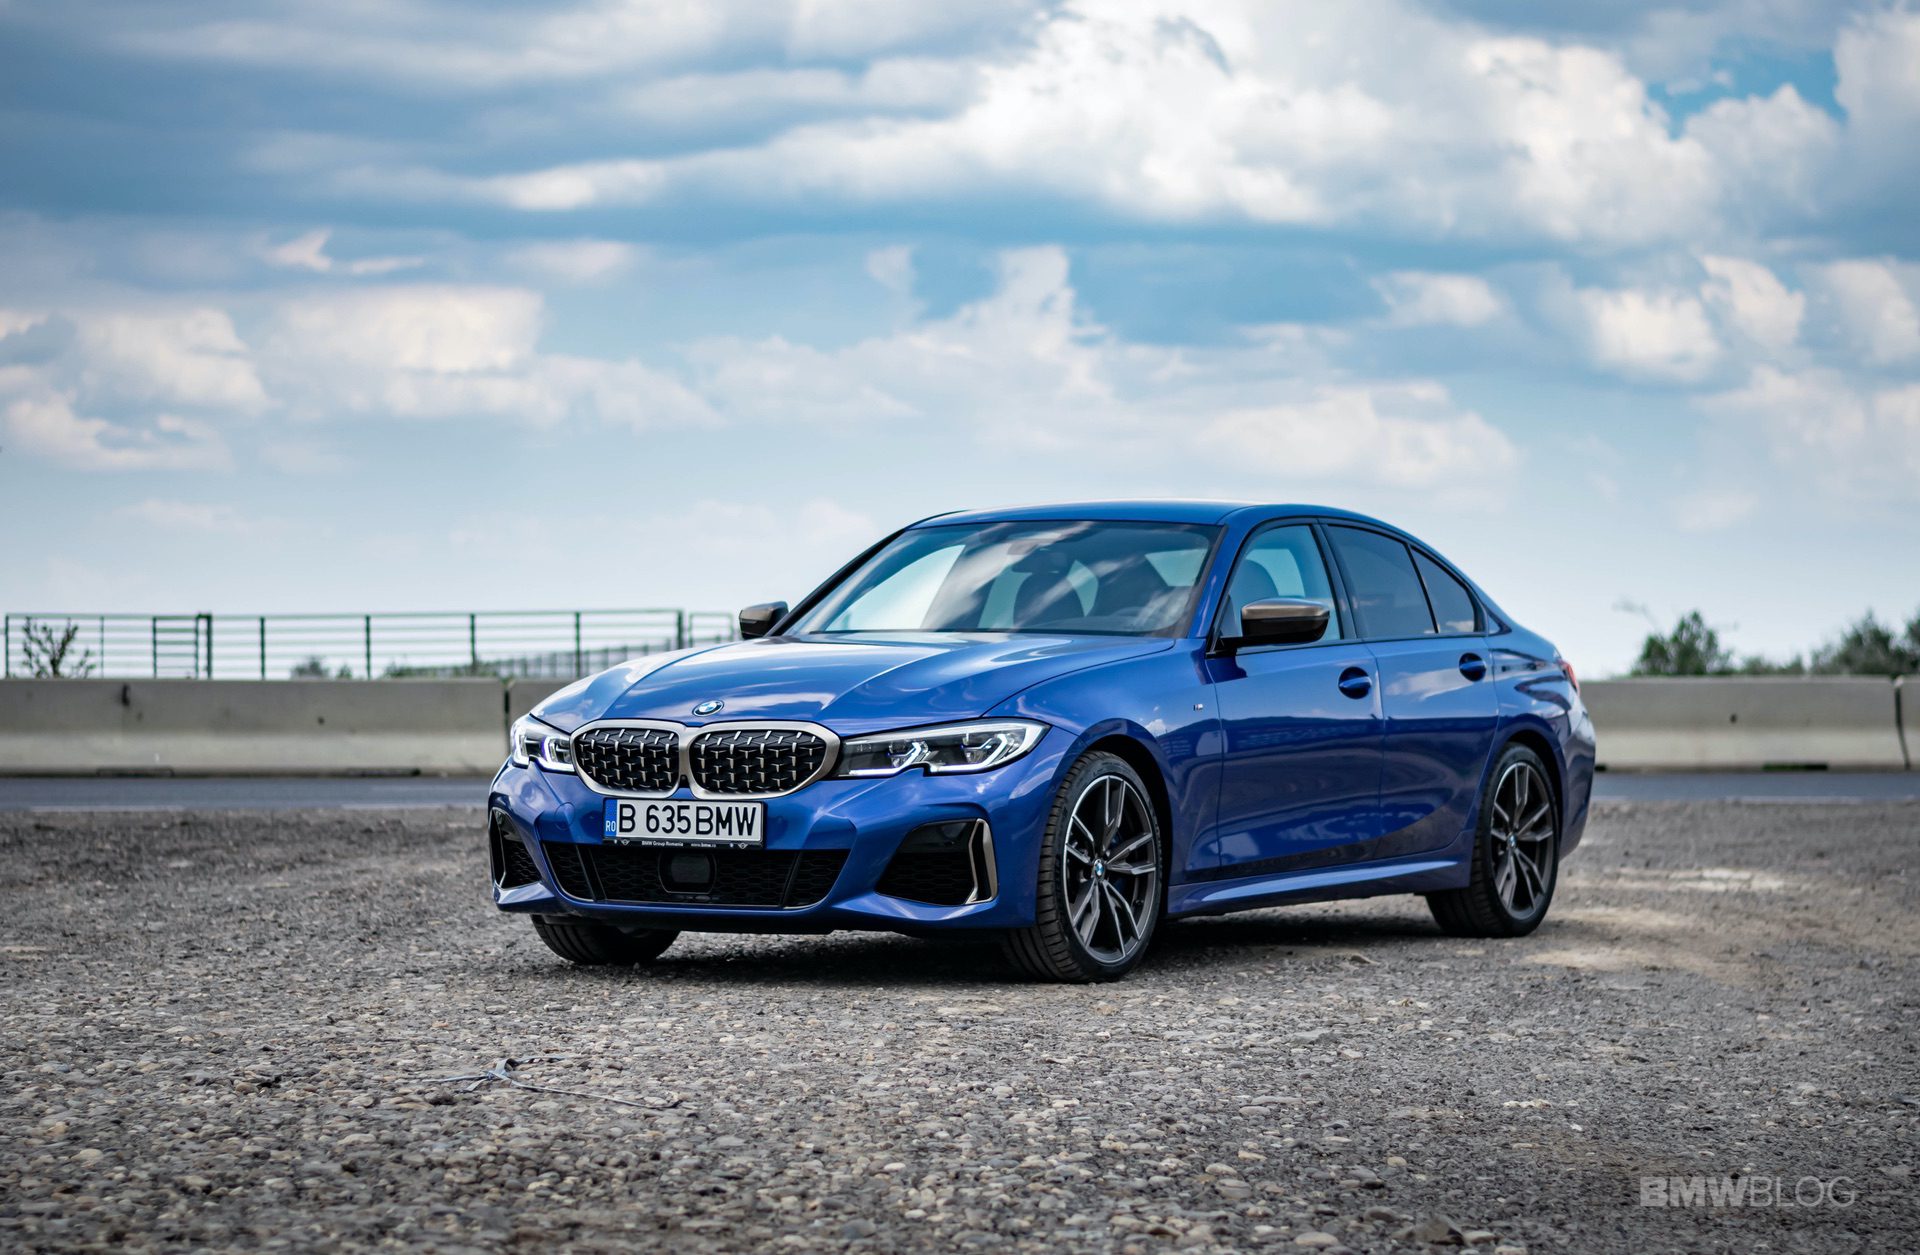 TEST DRIVE: 2020 BMW M340i xDrive – The Sweet Spot Of Comfort And